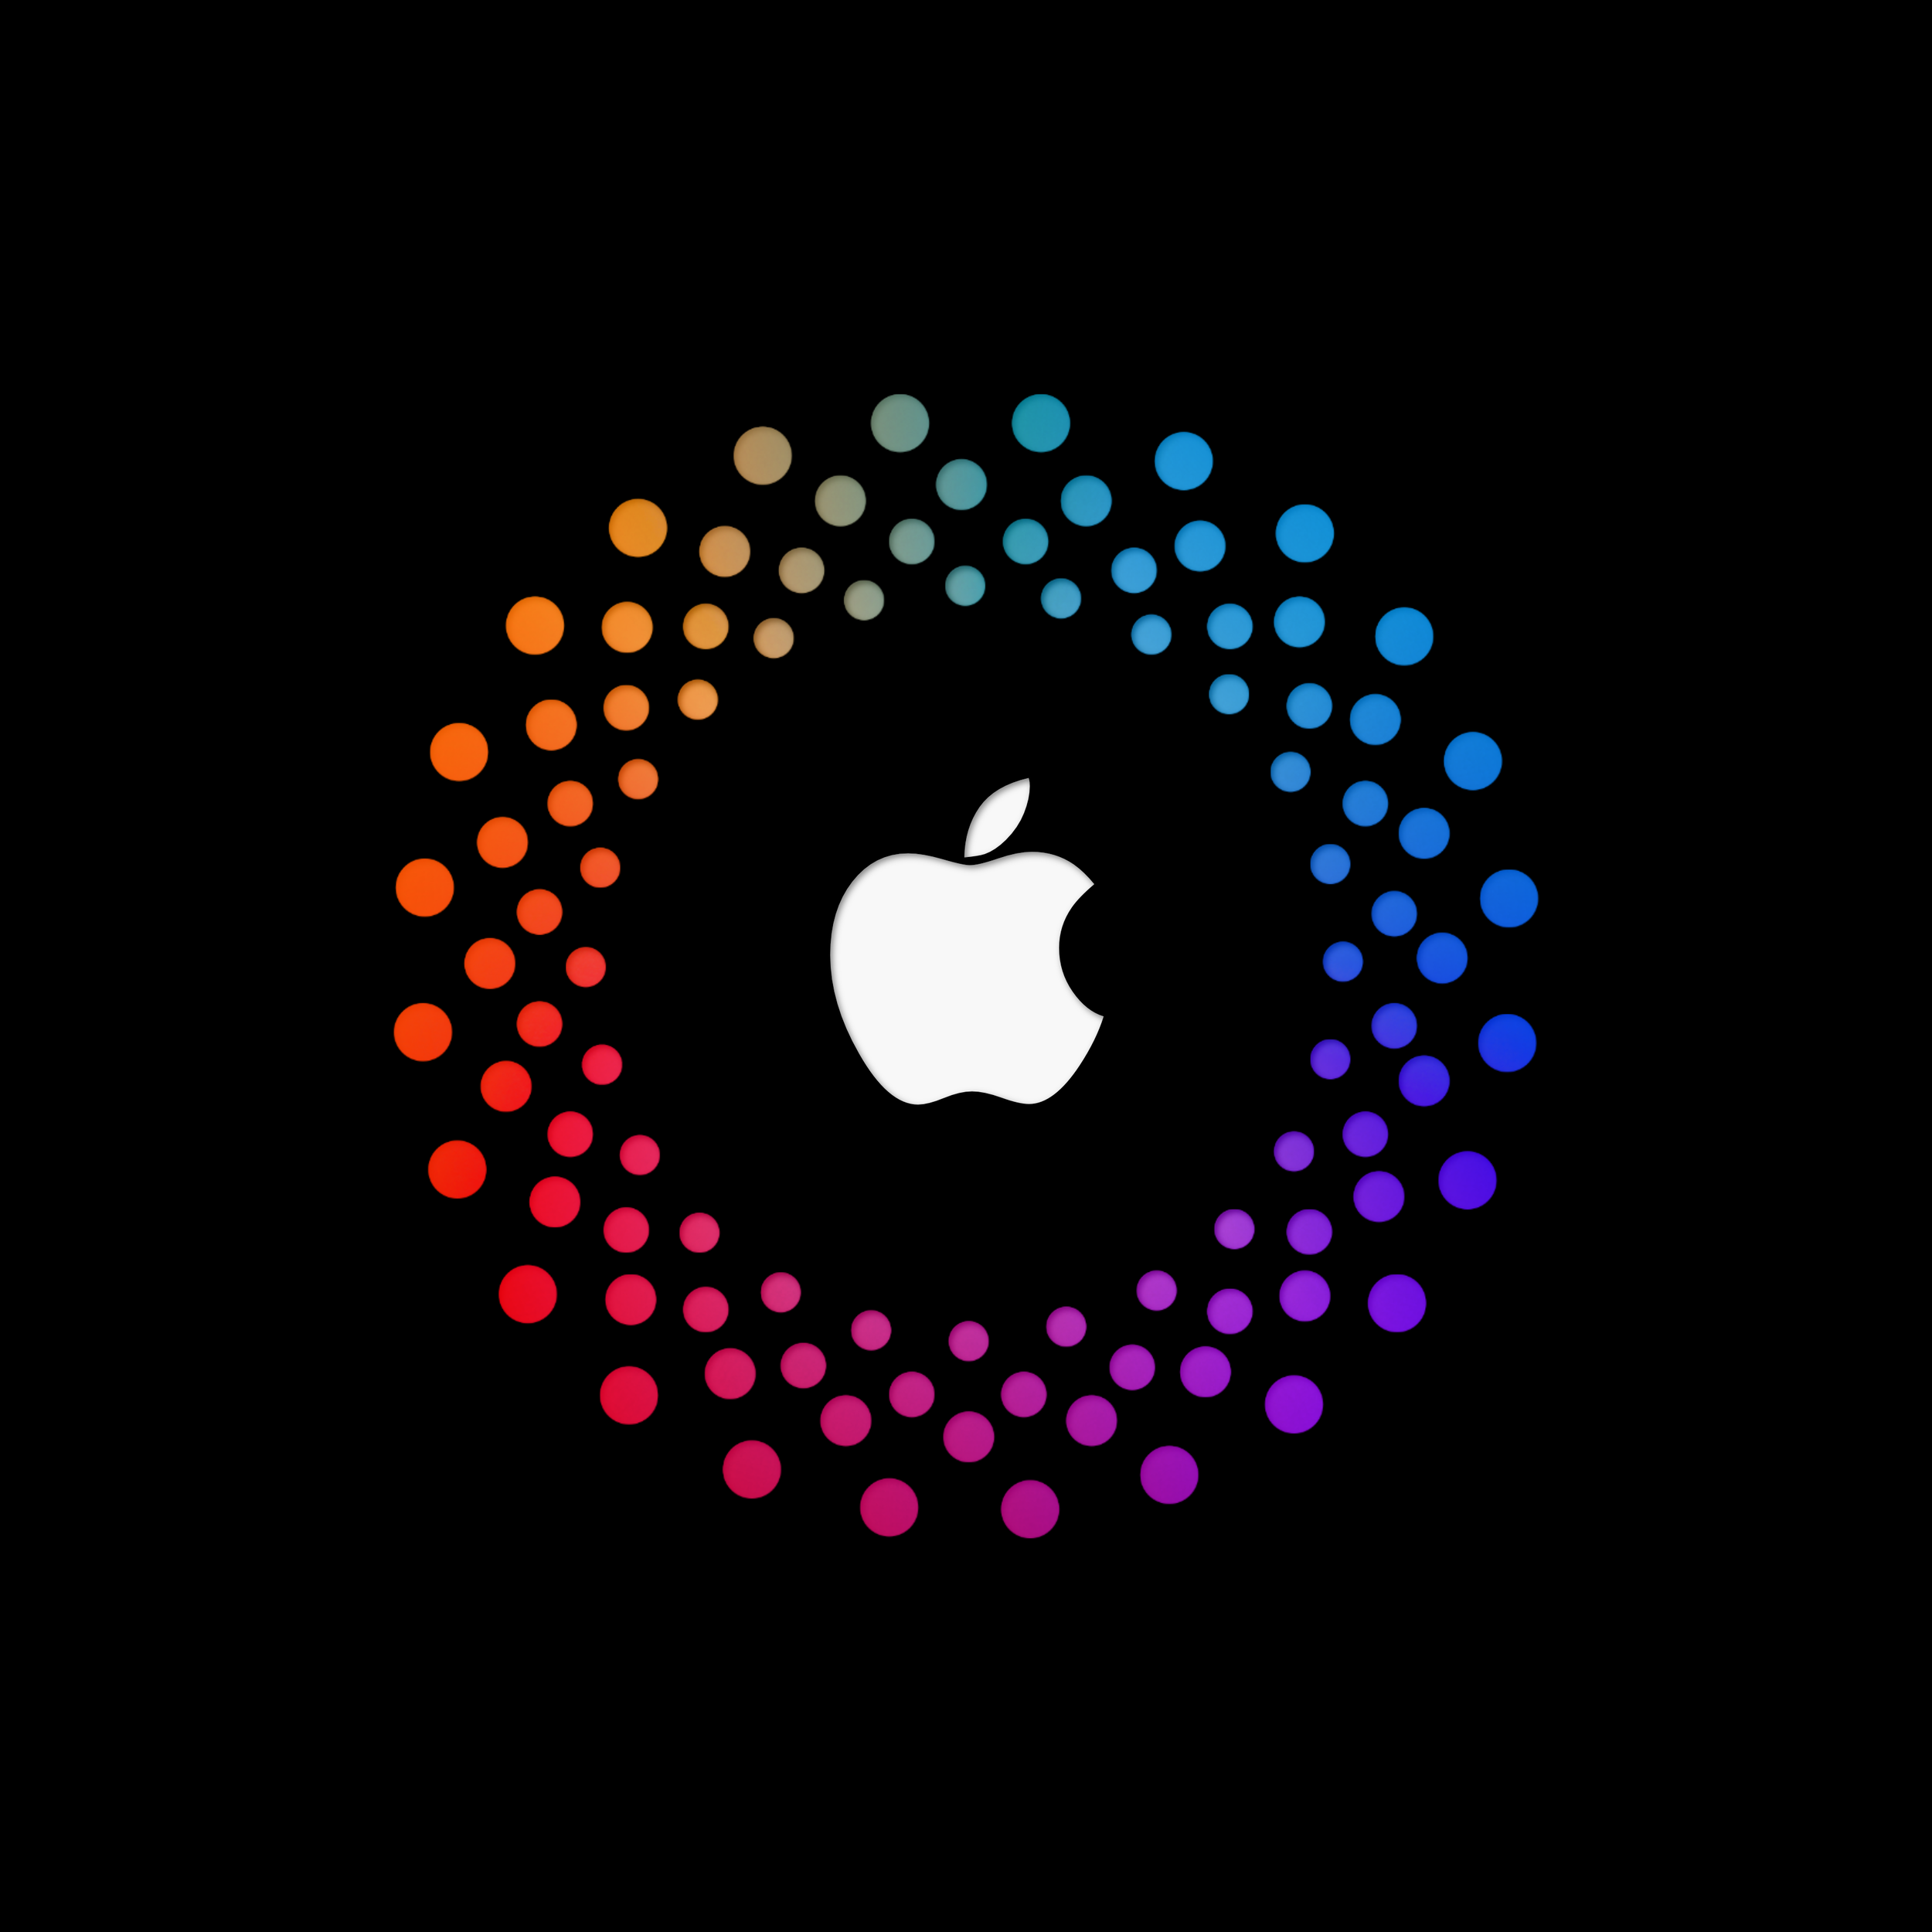 apple watch» 1080P, 2k, 4k HD wallpapers, backgrounds free download | Rare  Gallery